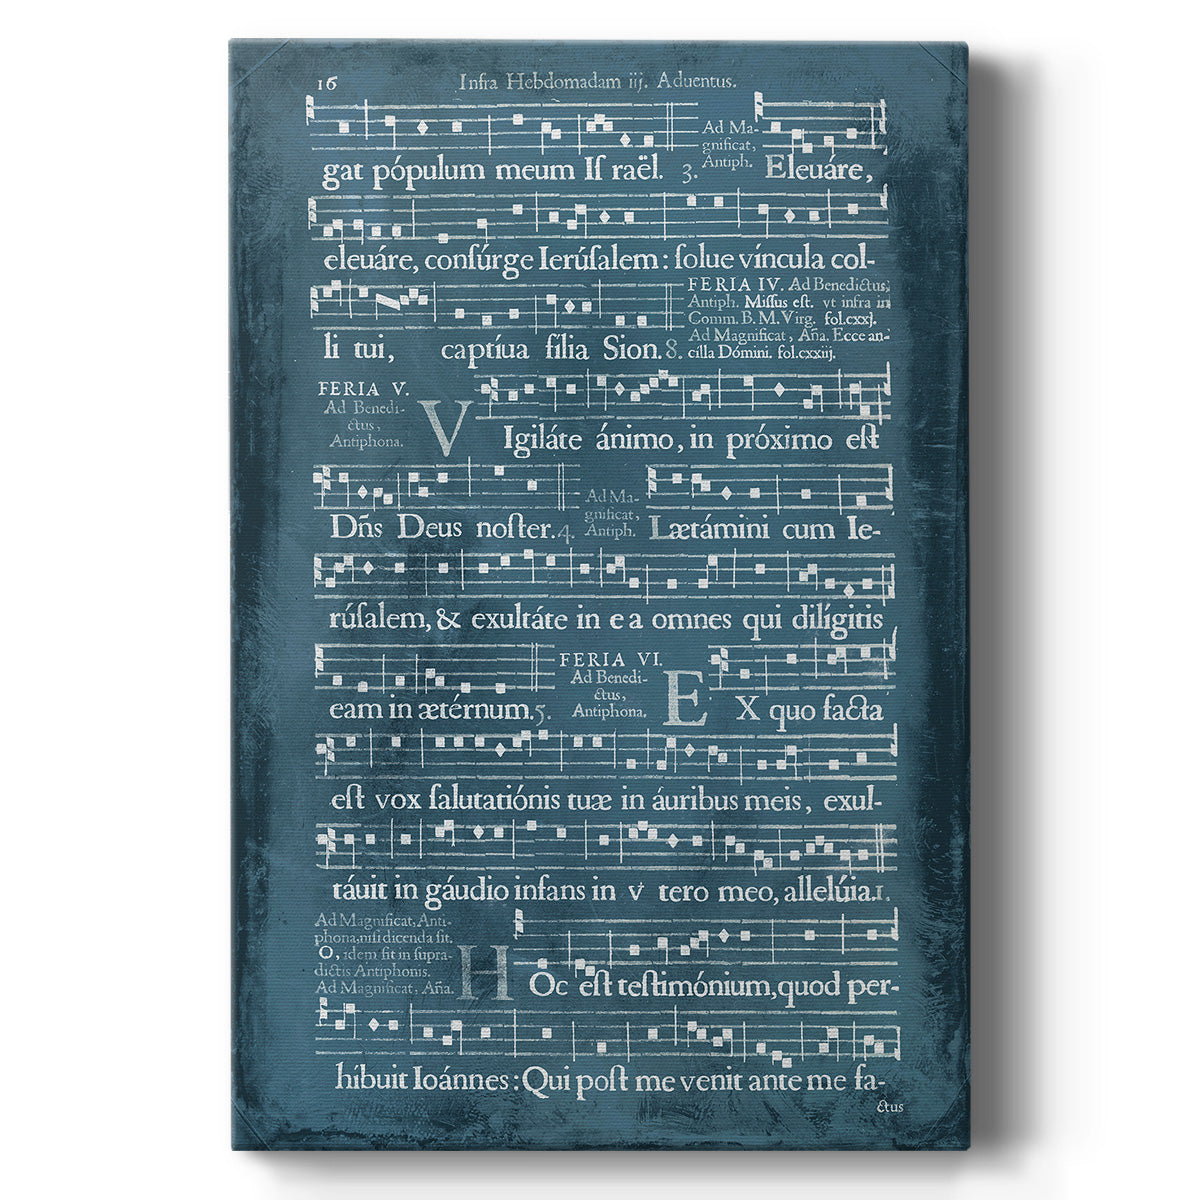 Graphic Songbook I Premium Gallery Wrapped Canvas - Ready to Hang